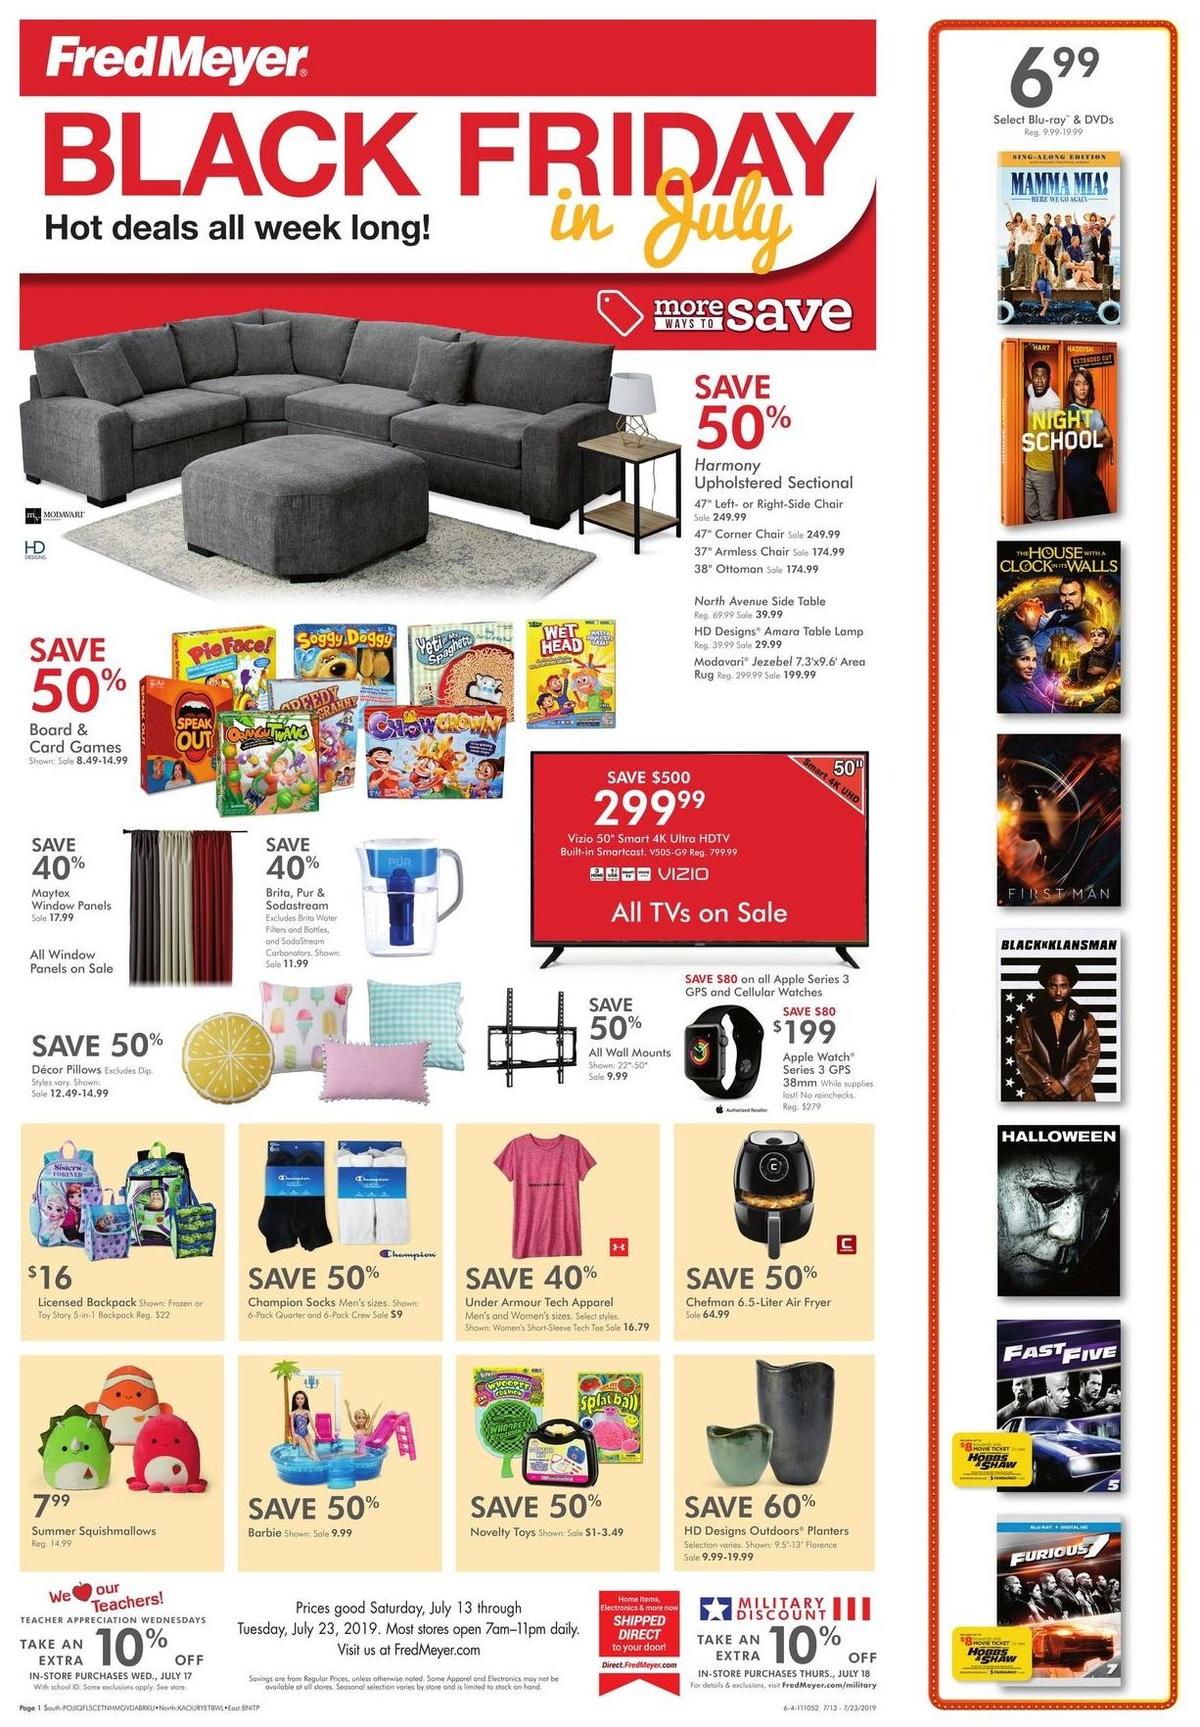 Fred Meyer Black Friday in July Weekly Ad & Specials from July 13